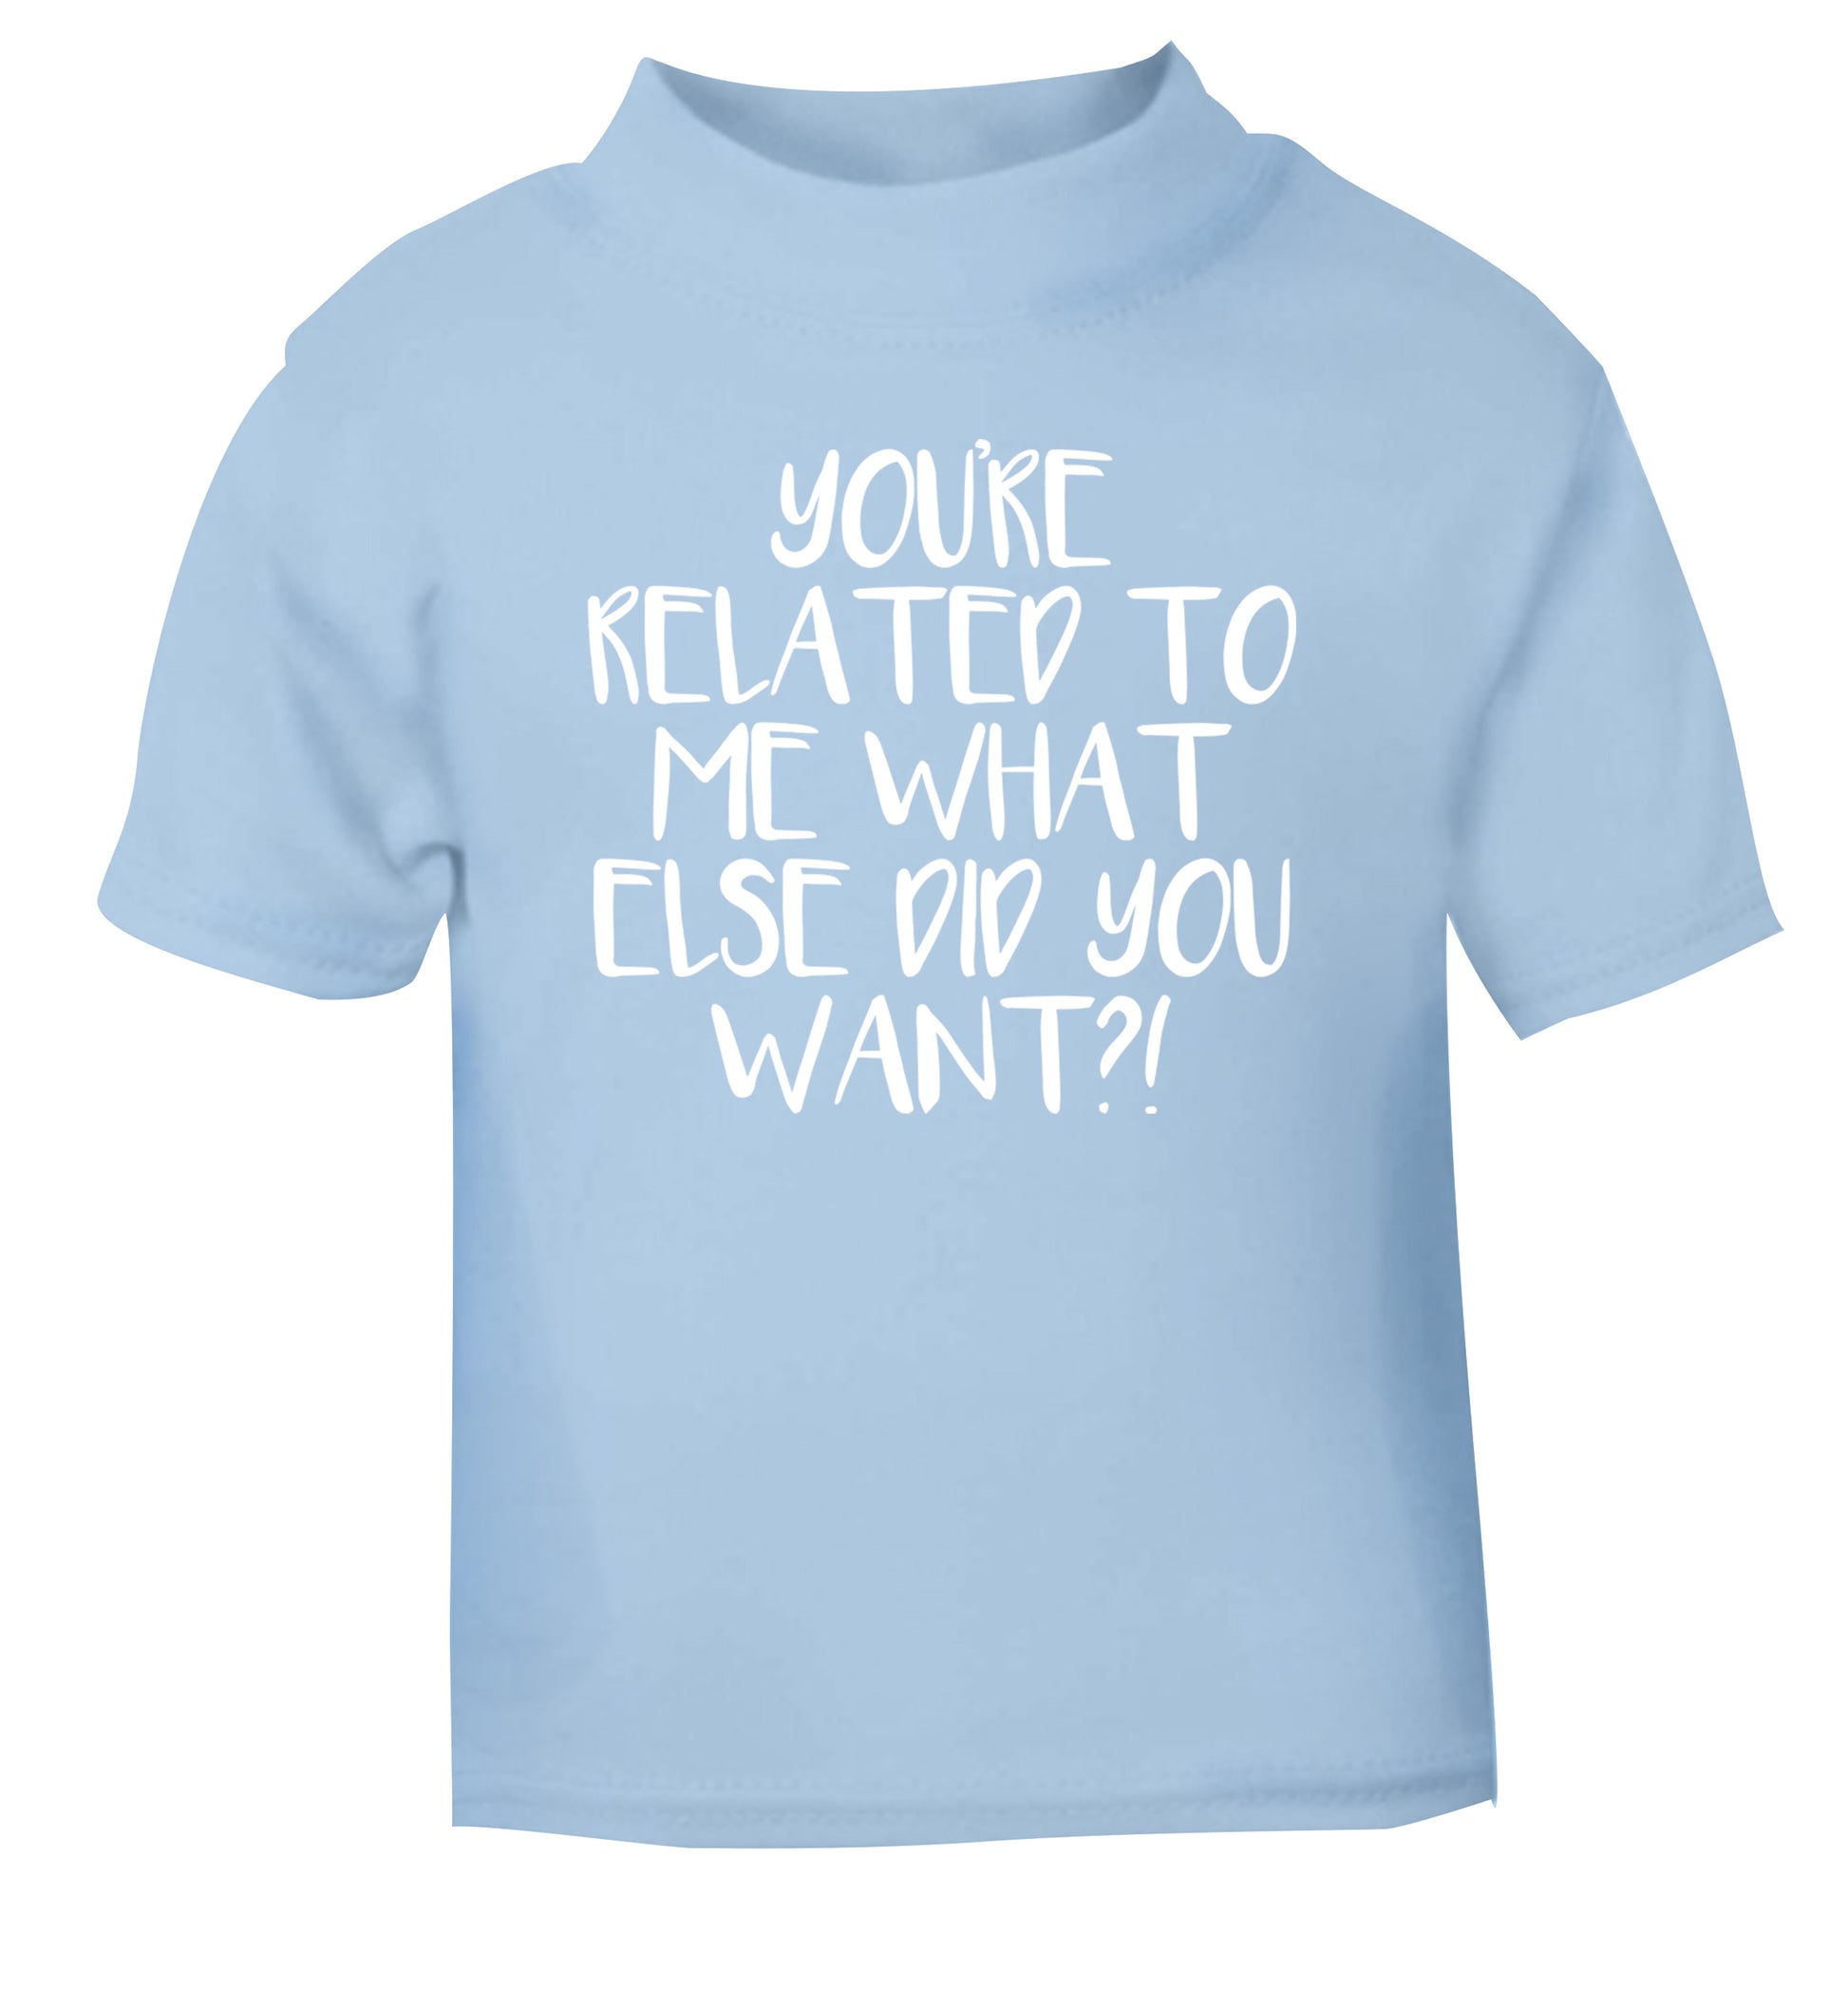 You're related to me what more do you want? light blue Baby Toddler Tshirt 2 Years